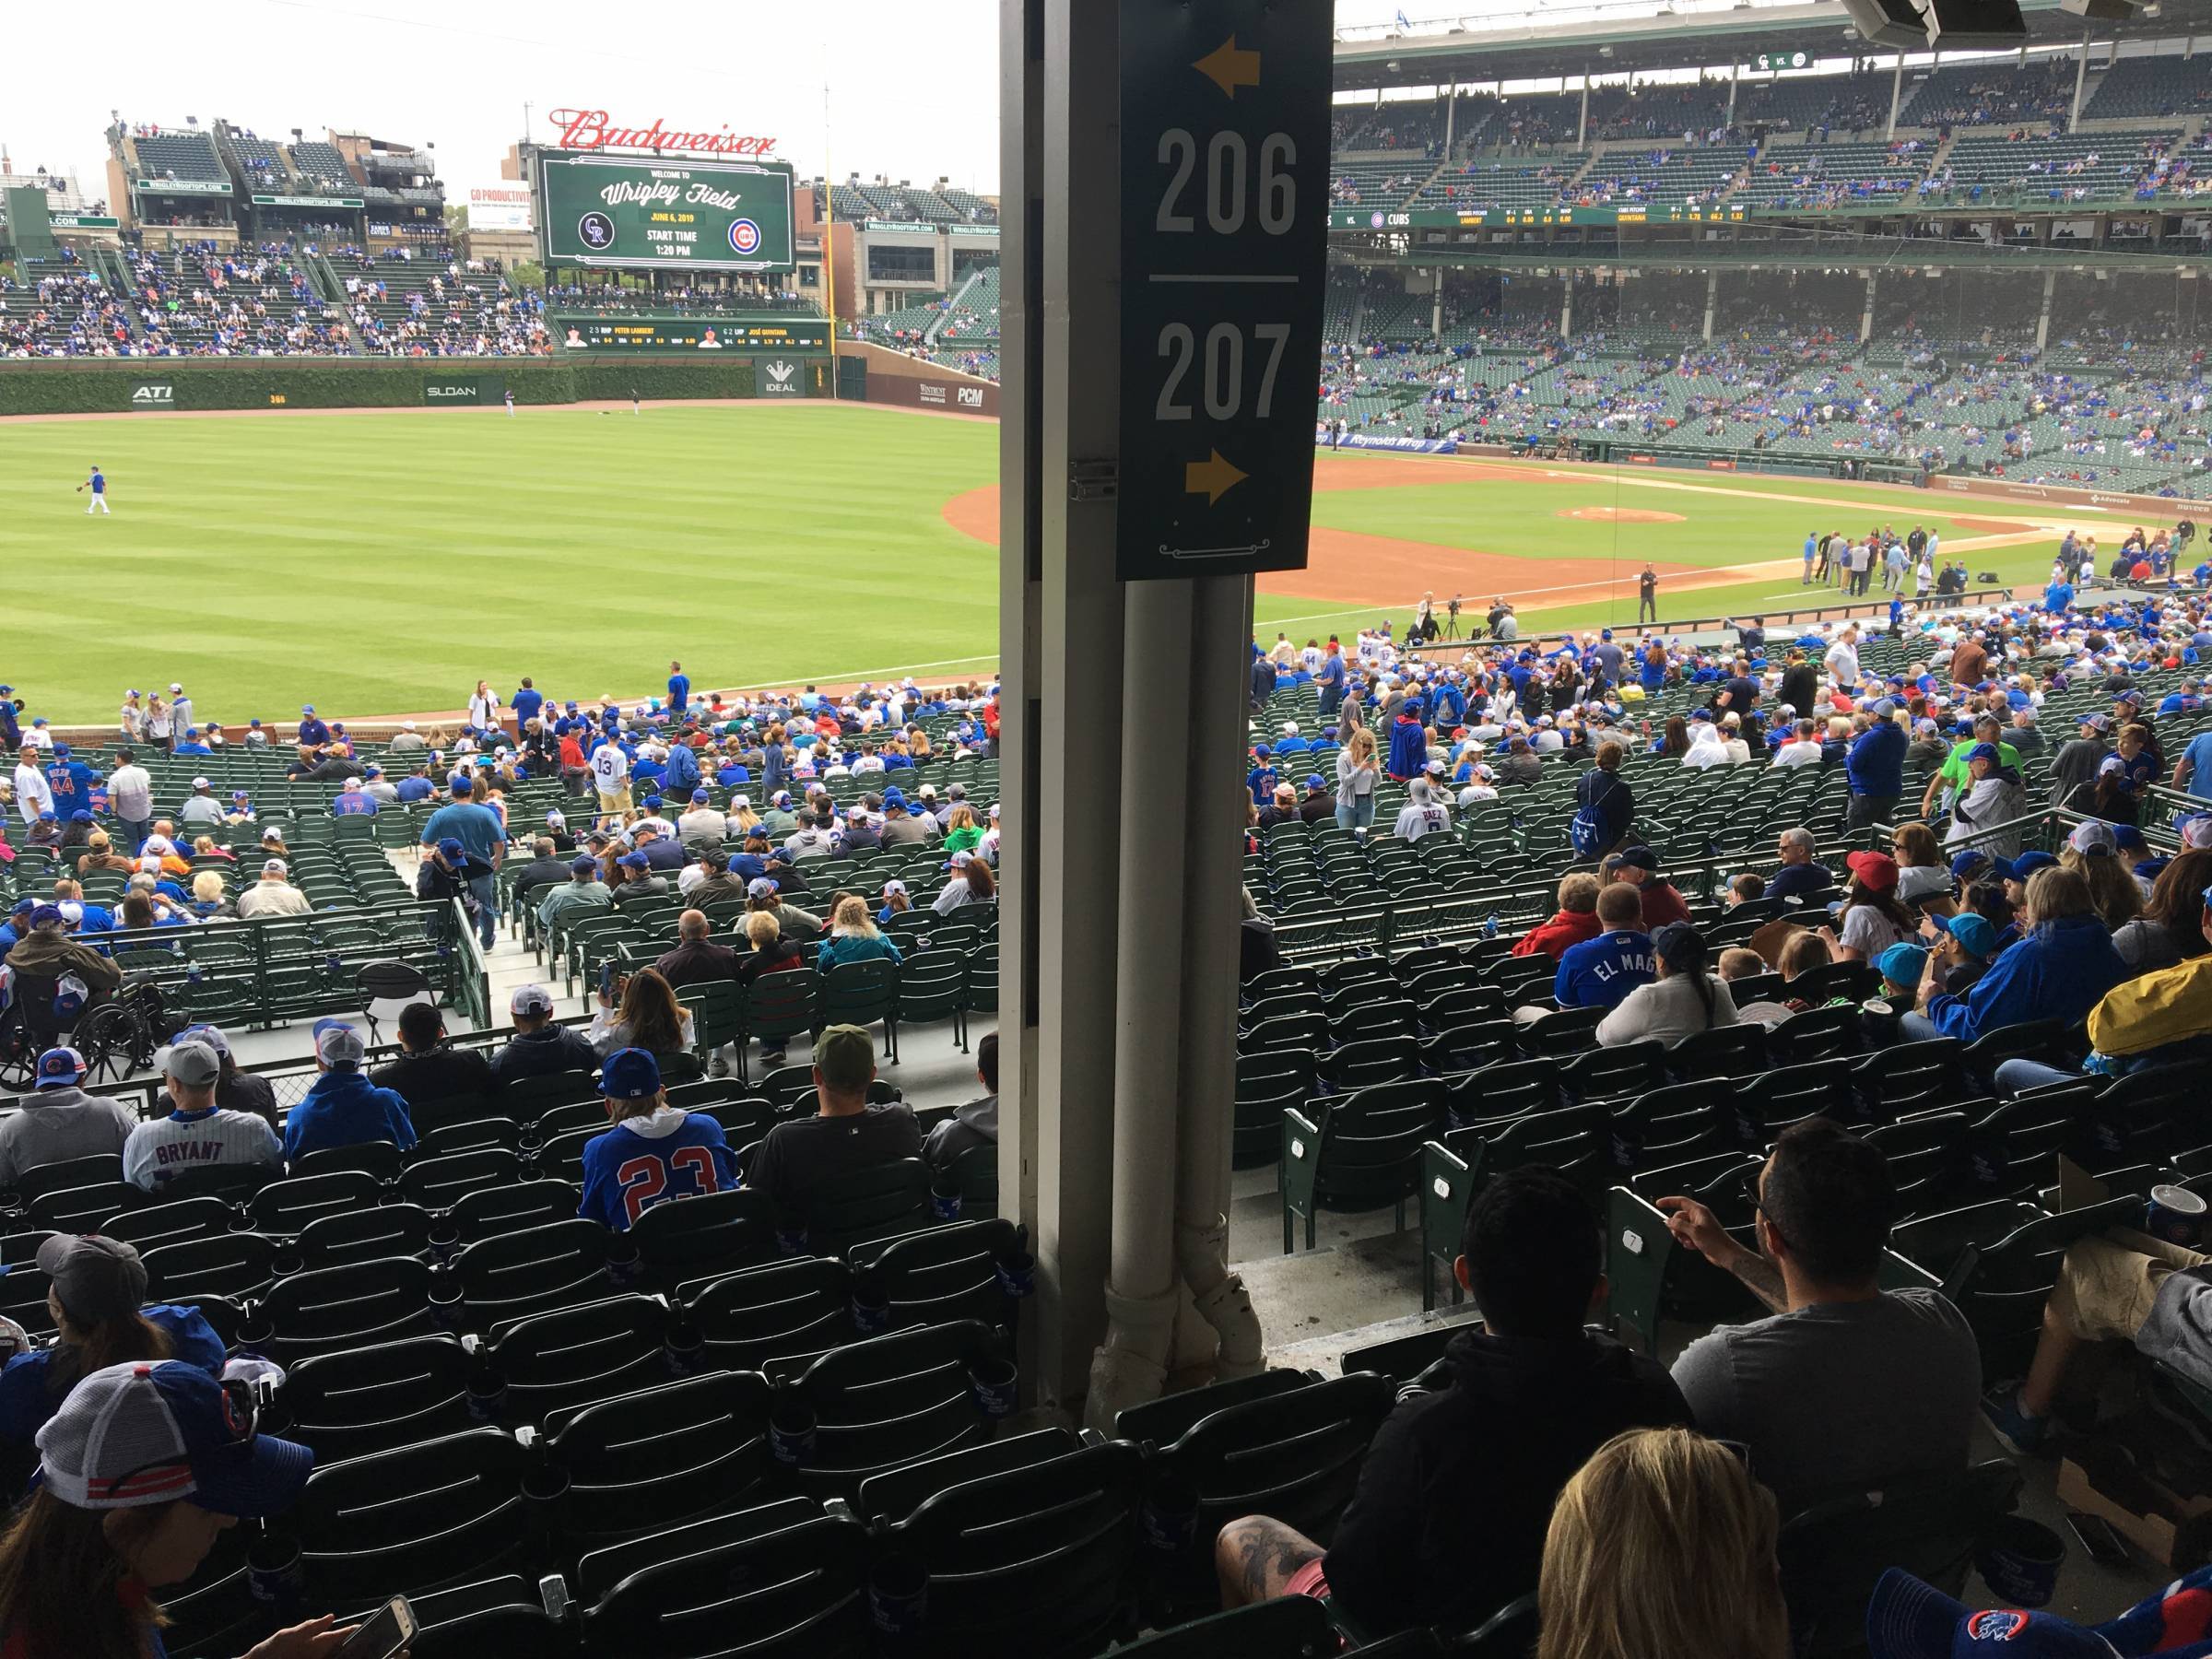 Pole in Section 206 at Wrigley Field